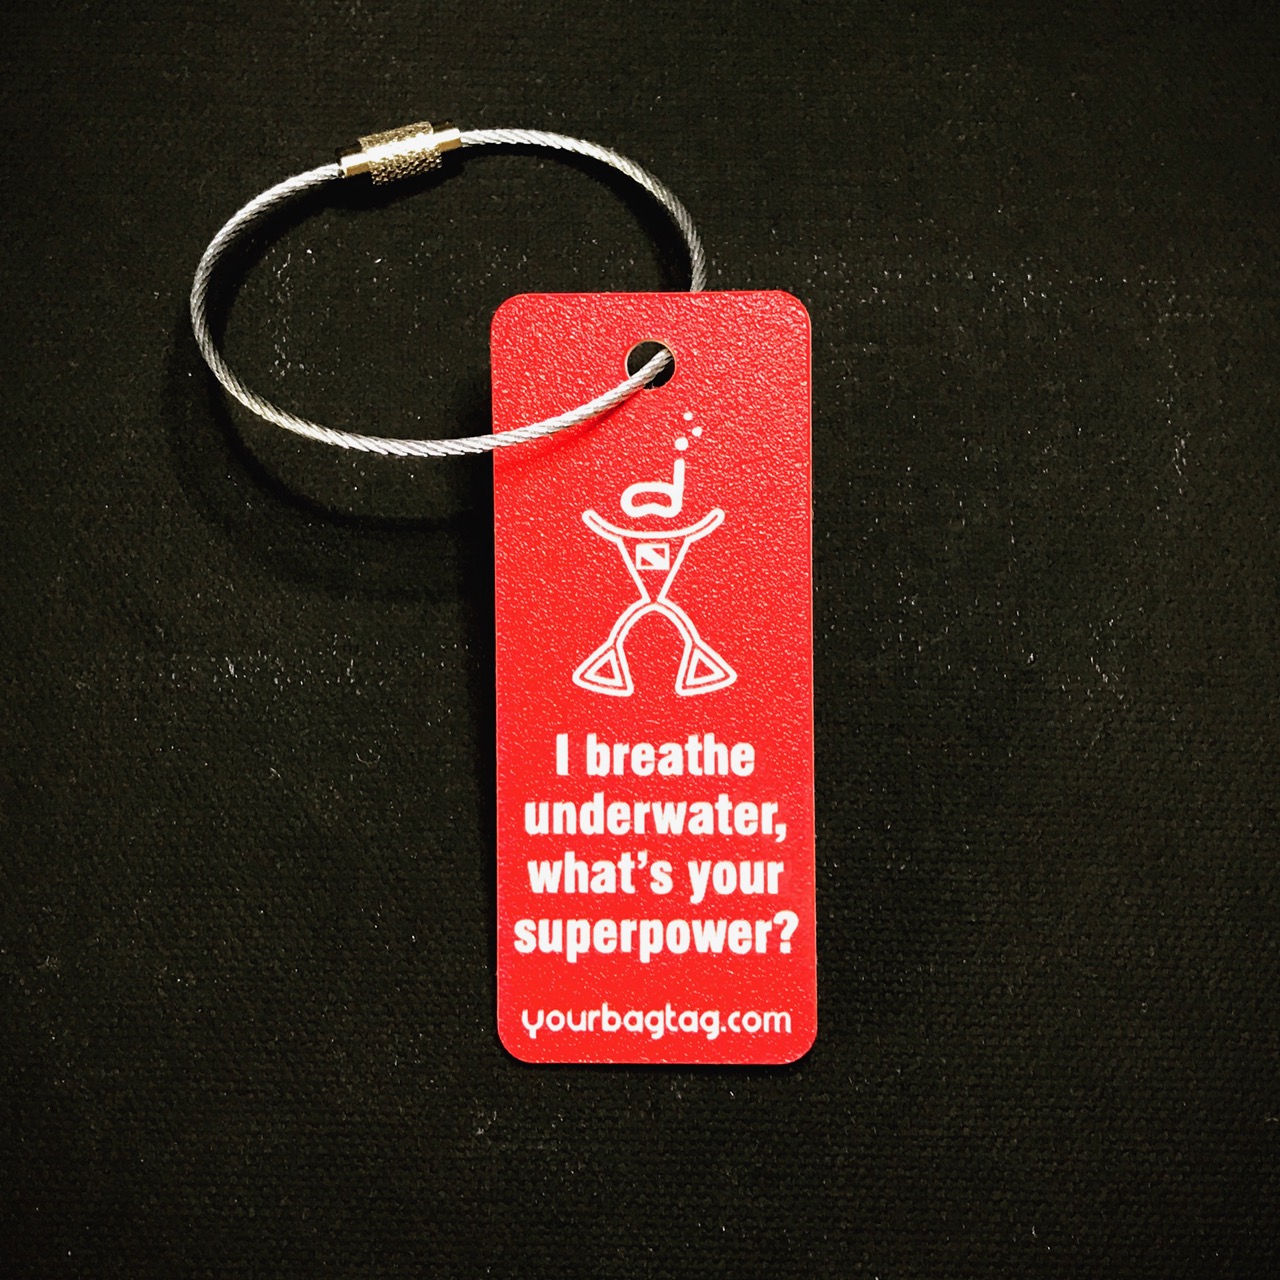 Scuba Superpower Gear Bag Tag - Yourbagtag